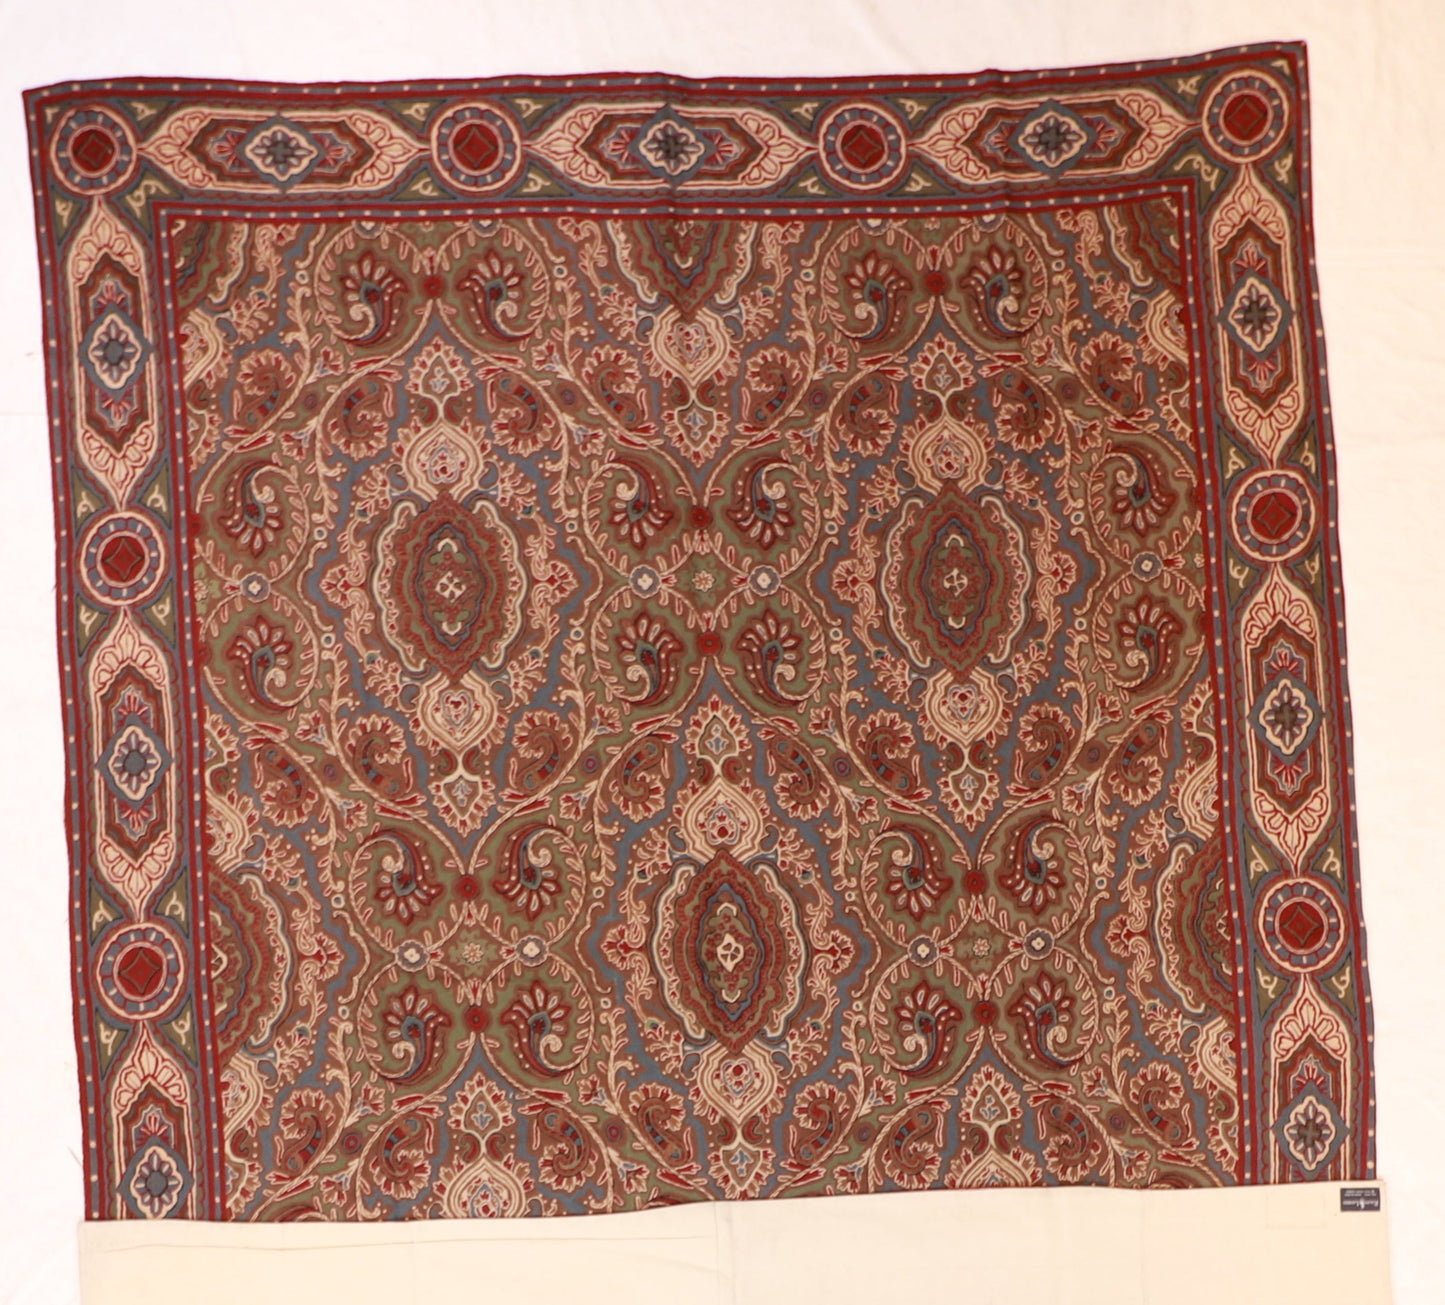 9x12 - Chainstitch Wool Floral Rectangle - Hand Knotted Rug